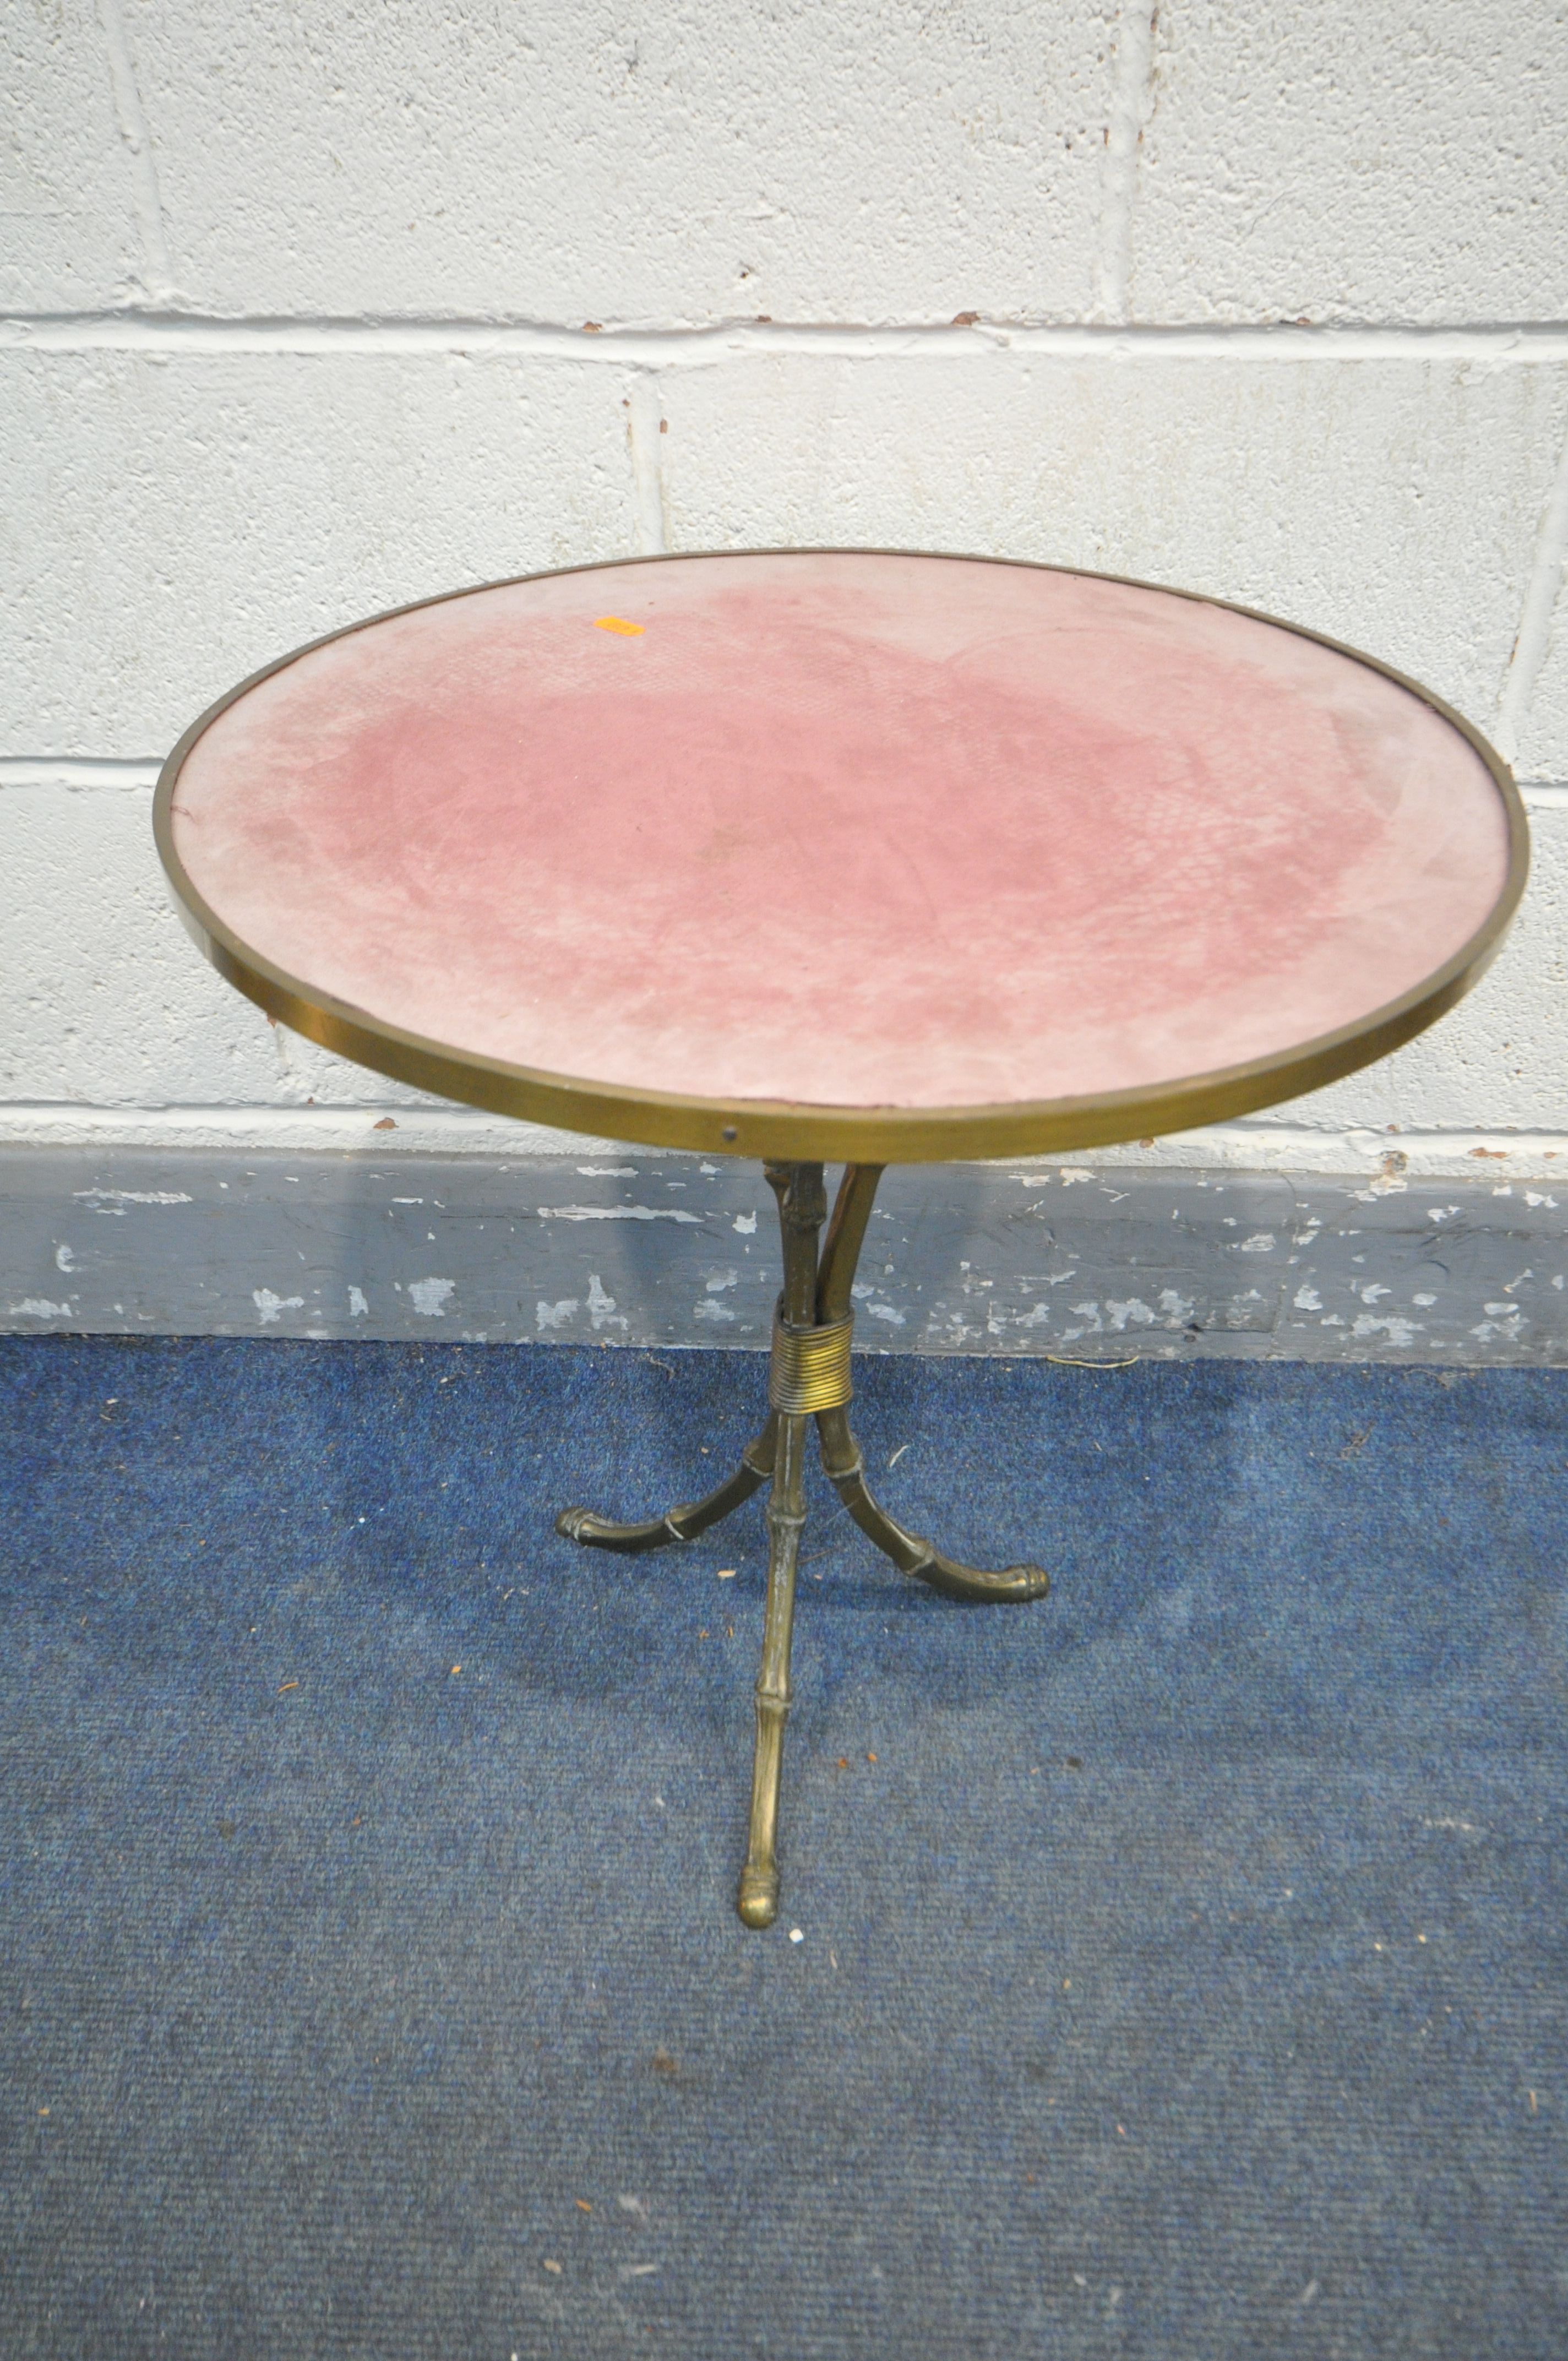 AN EARLY 20TH CENTURY BRASS CIRCULAR BAMBOO EFFECT SIDE TABLE, with a pink baize top surface,